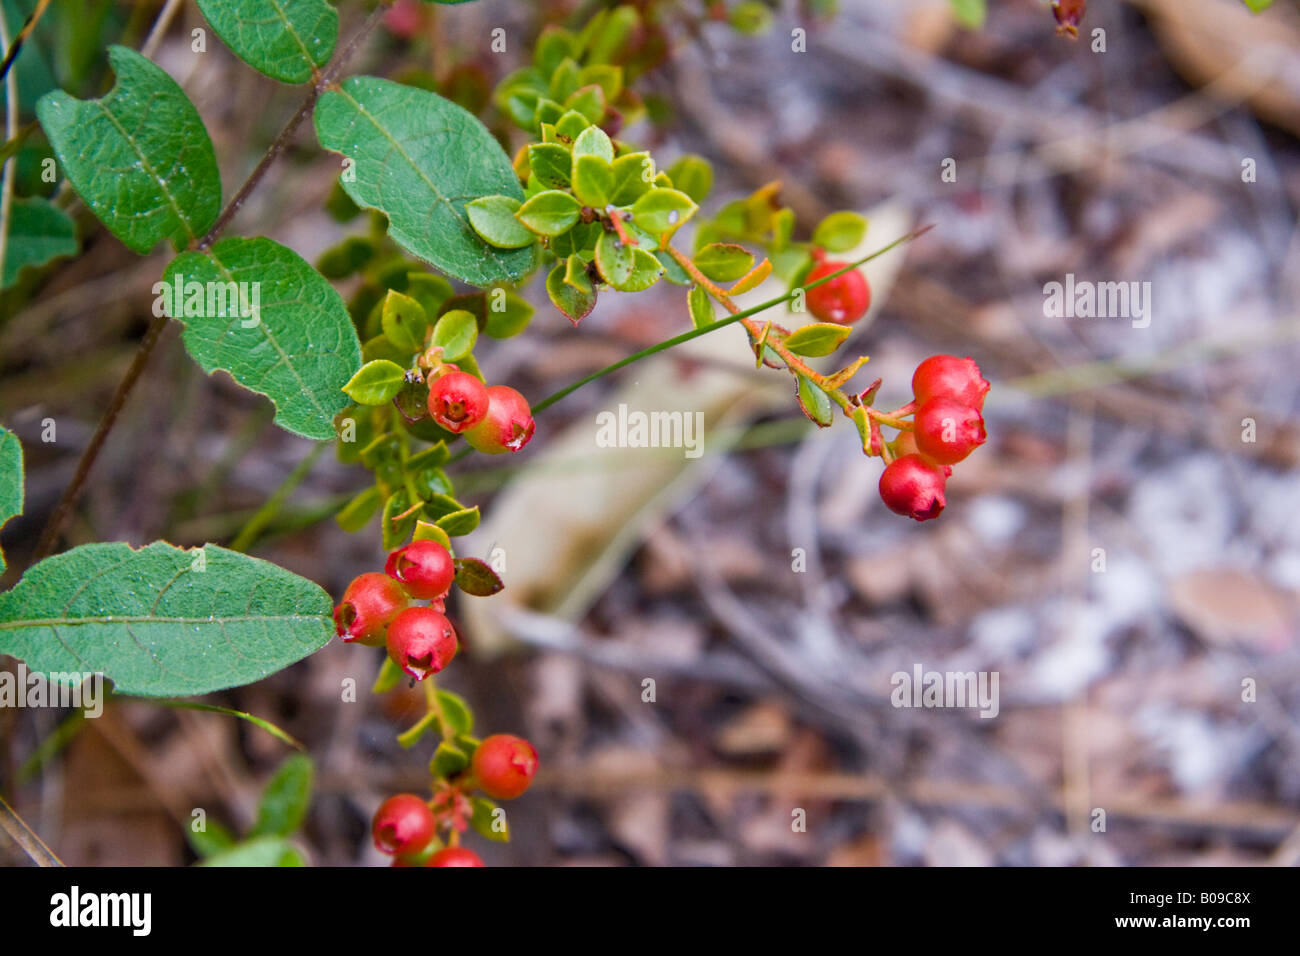 Florida Evergreen Blueberries grow in flatland scrub where they find acid soil conditions Stock Photo